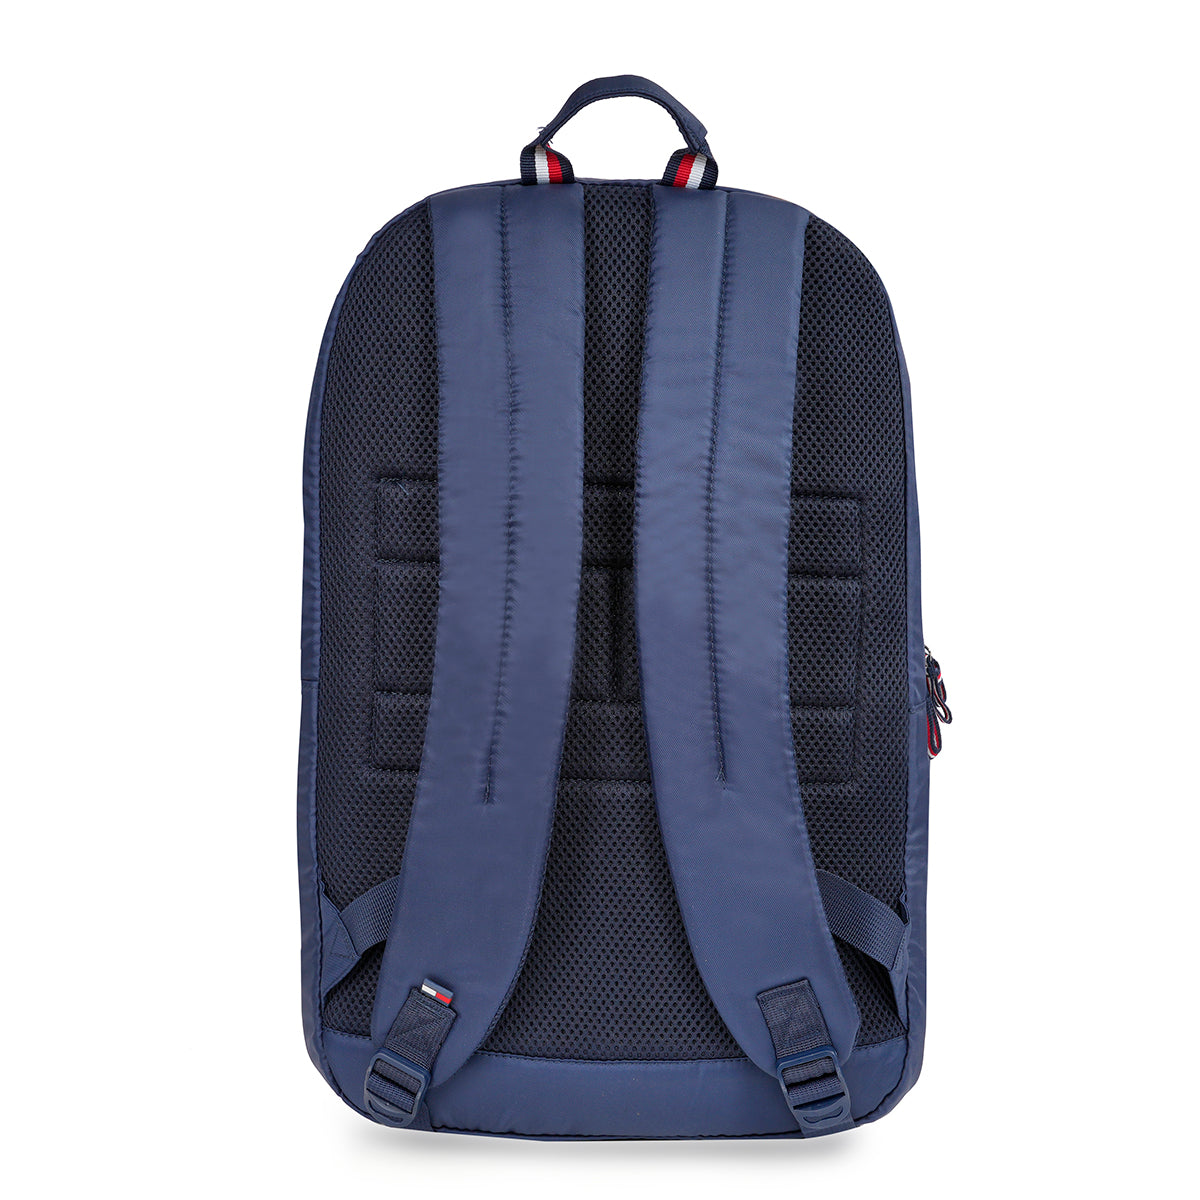 Tommy Hilfiger Cosmicquest Back to School Backpack Navy